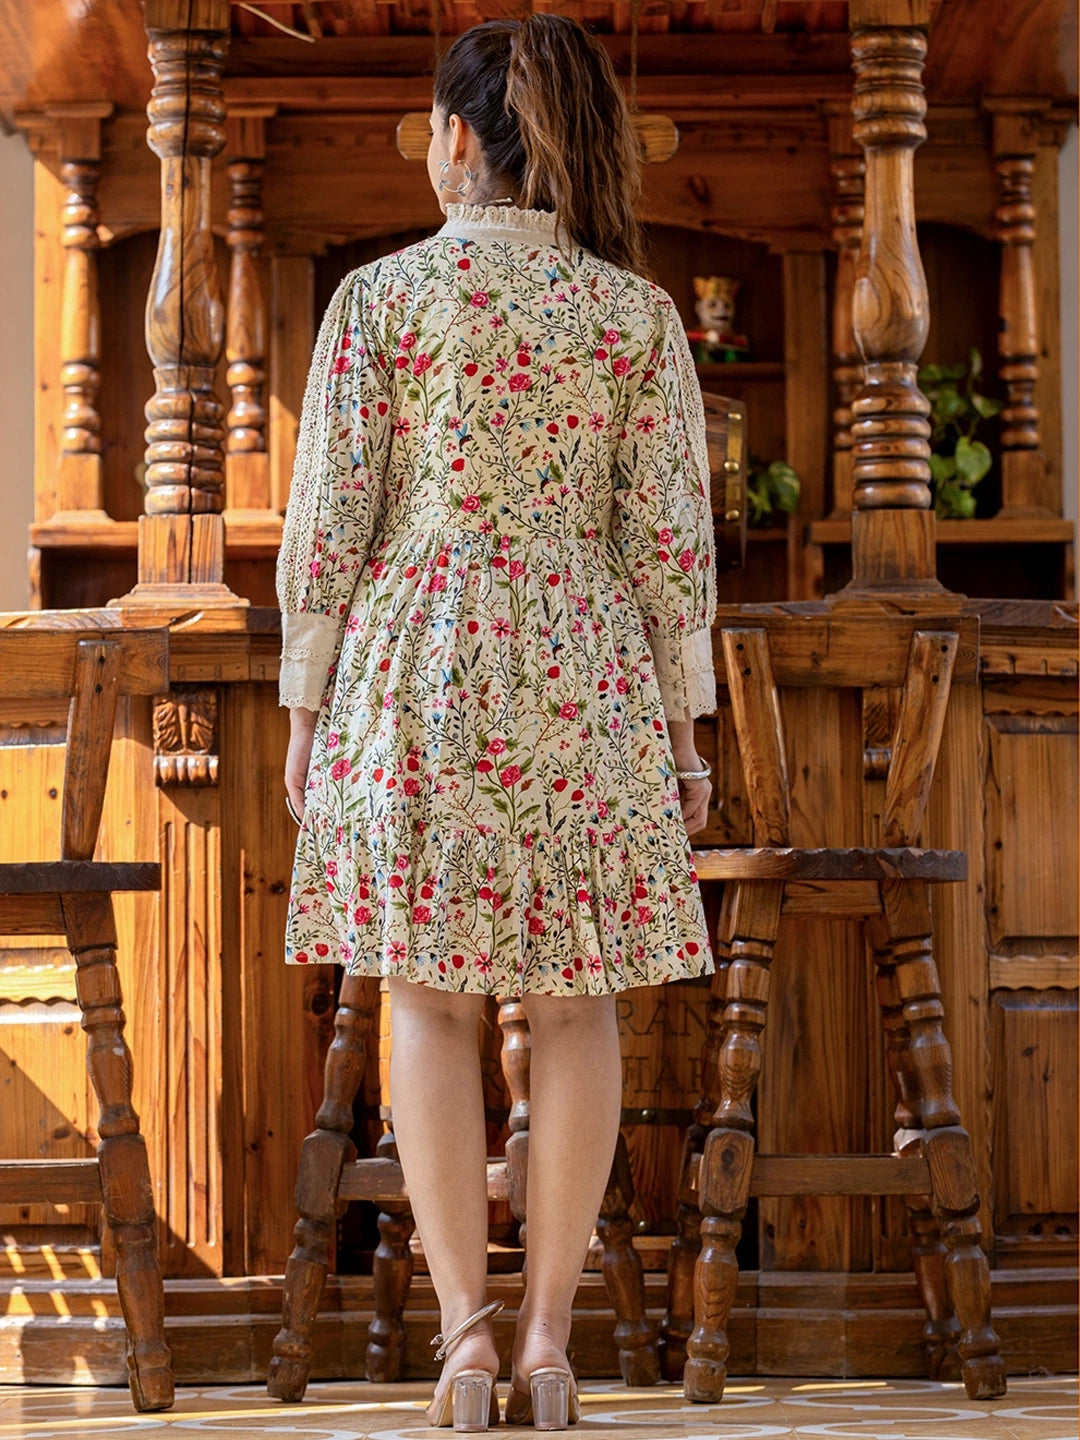 Blossom Bliss: Cotton Embroidery Gown